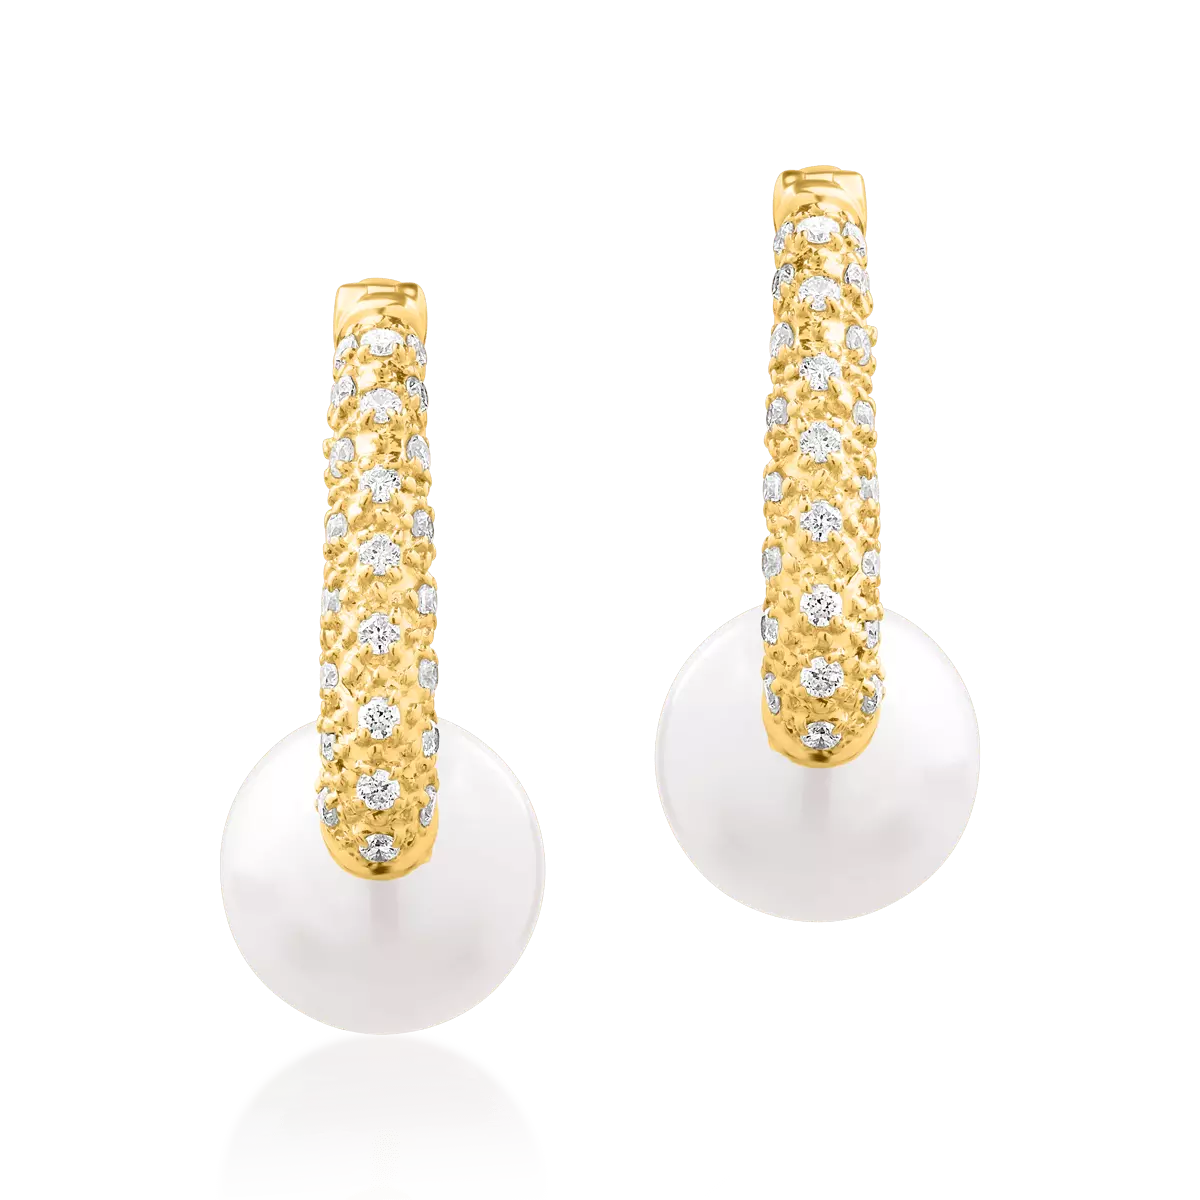 14K yellow gold earrings with 5.19ct fresh water cultured pearls and 0.17ct diamonds